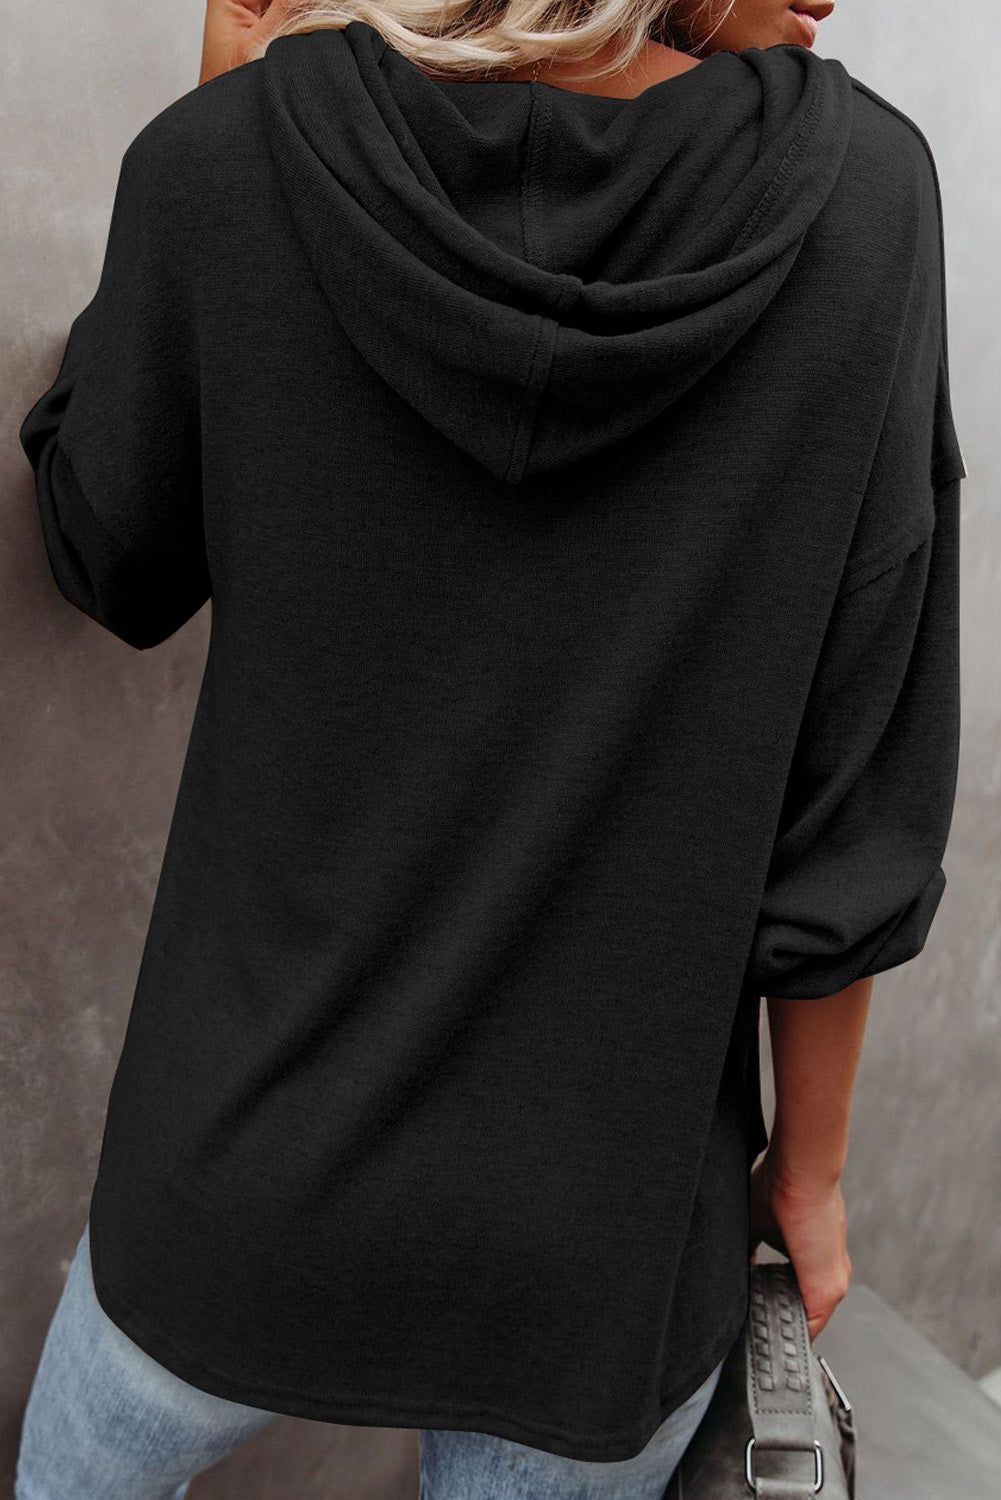 Black Button Front Pullover Hooded Sweatshirt